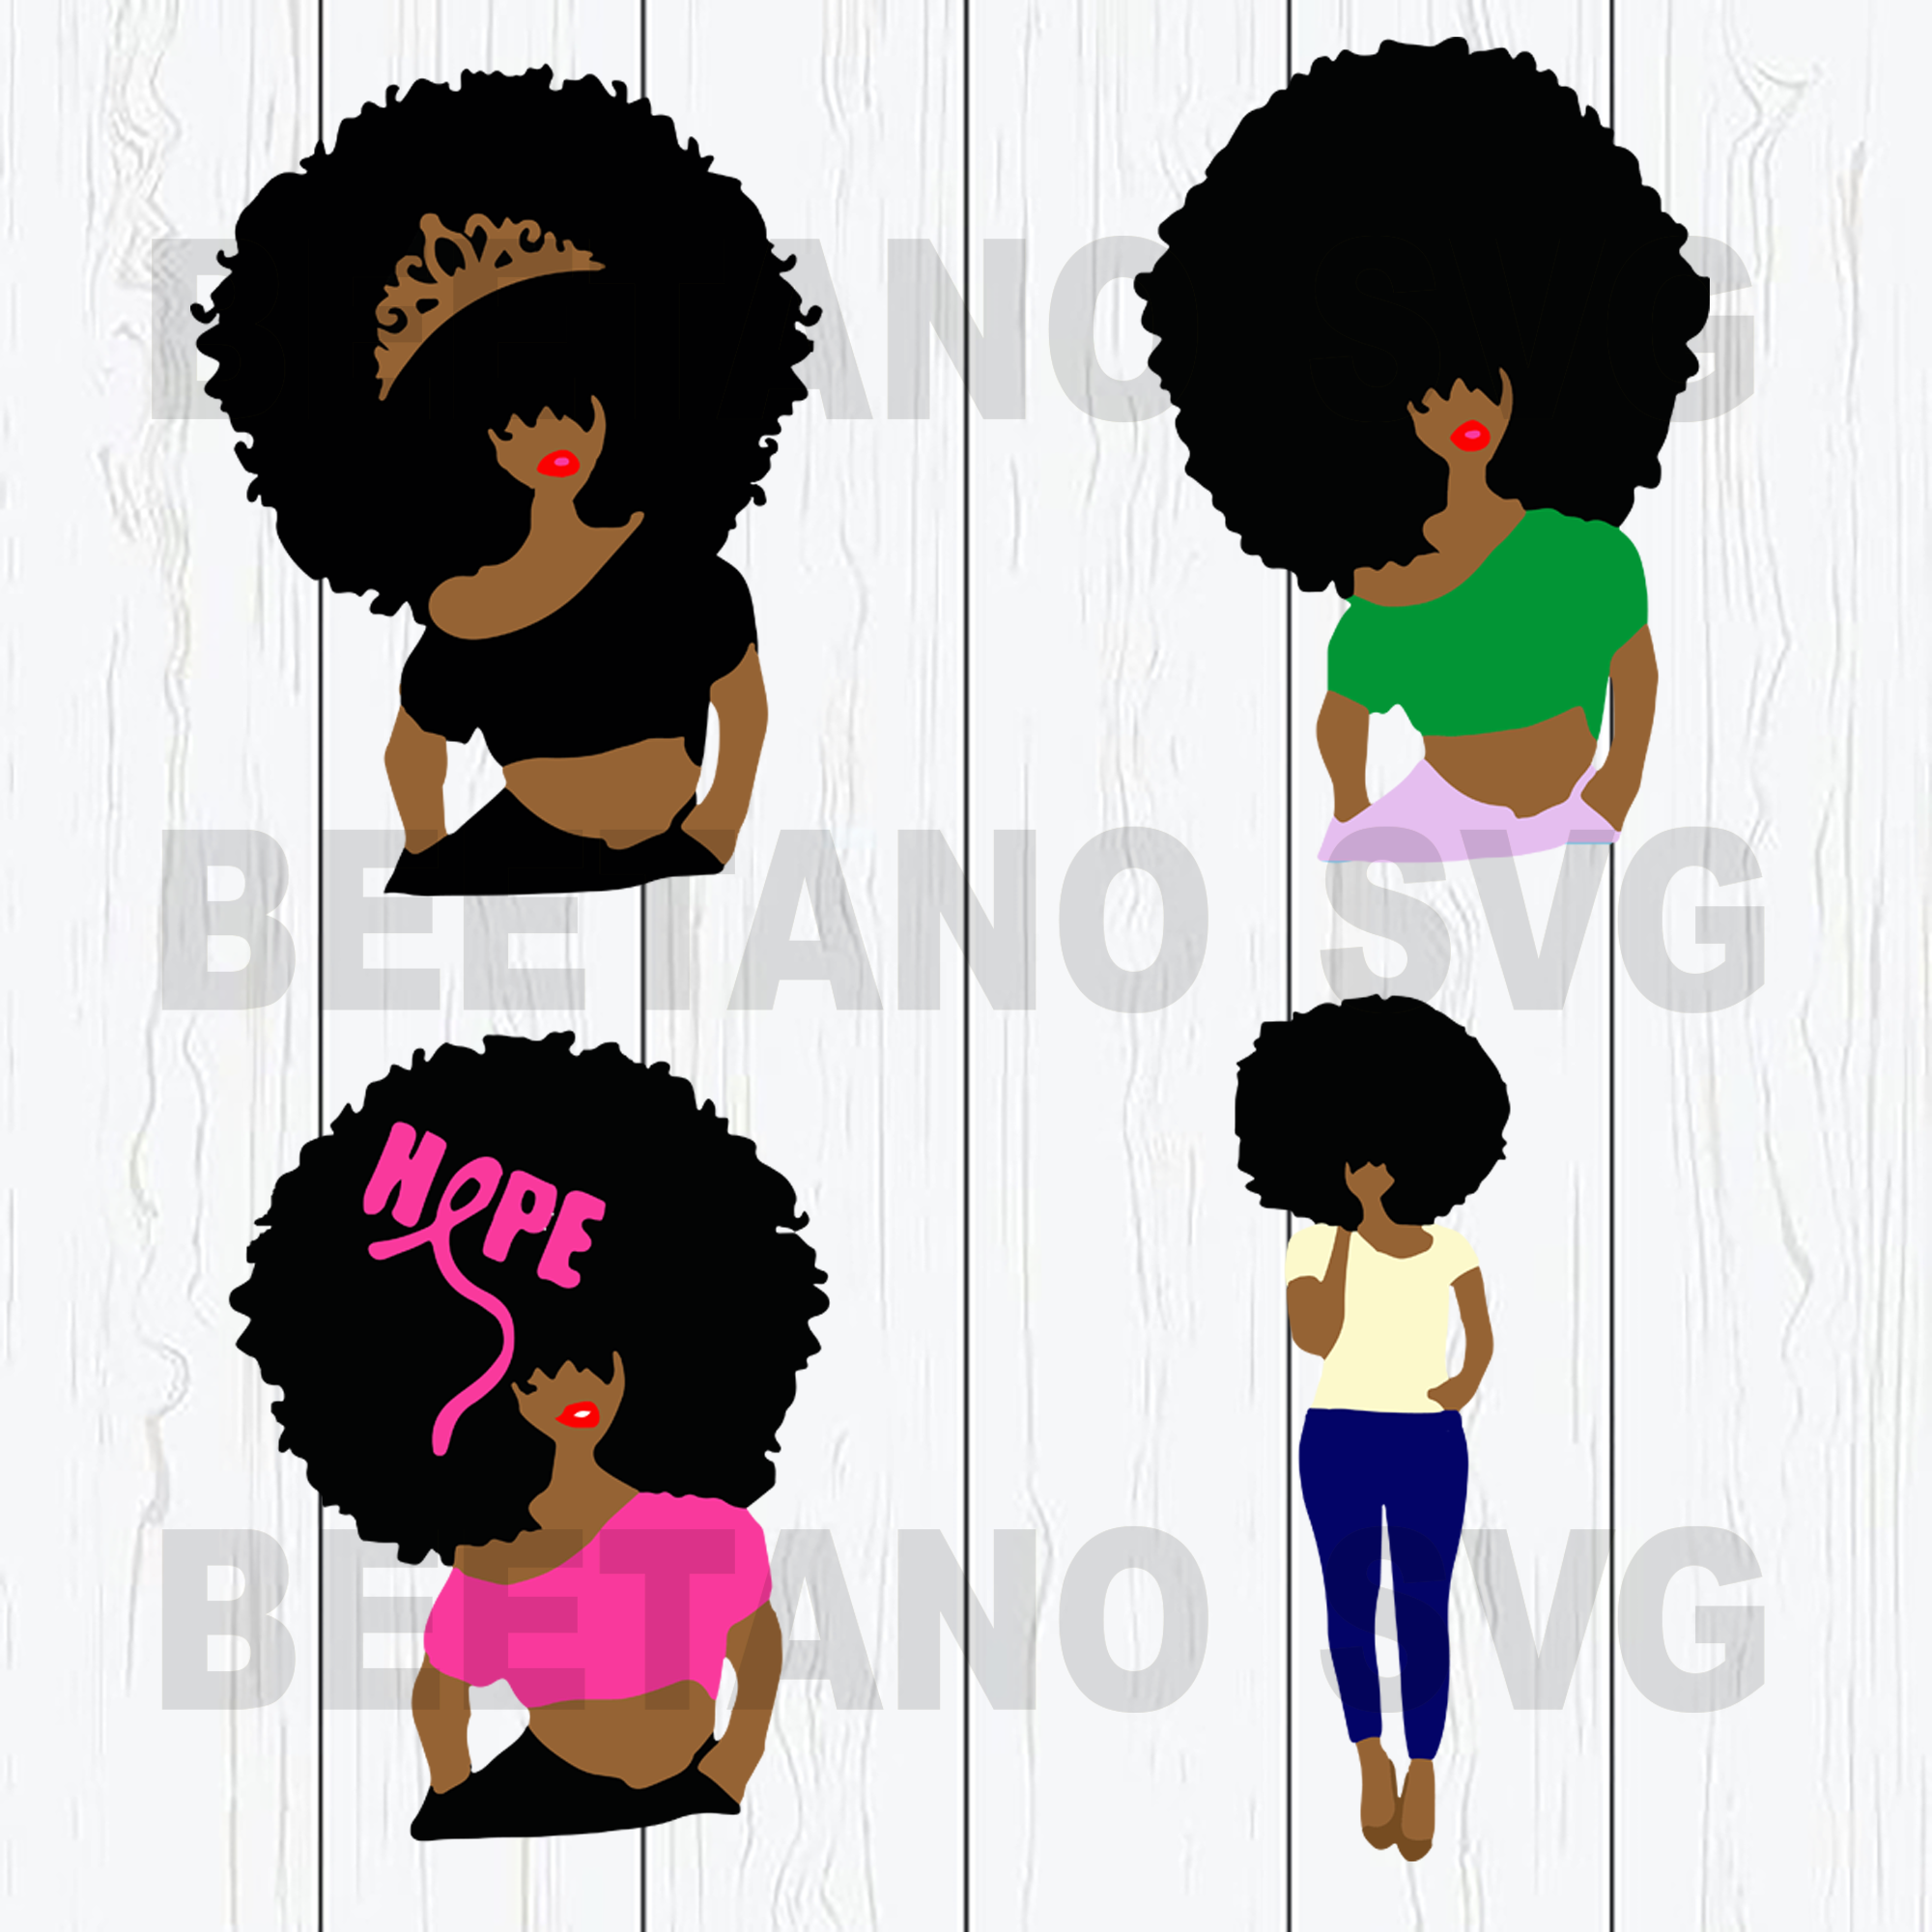 Afro woman black girl SVG, DXF, EPS, PNG Instant Download